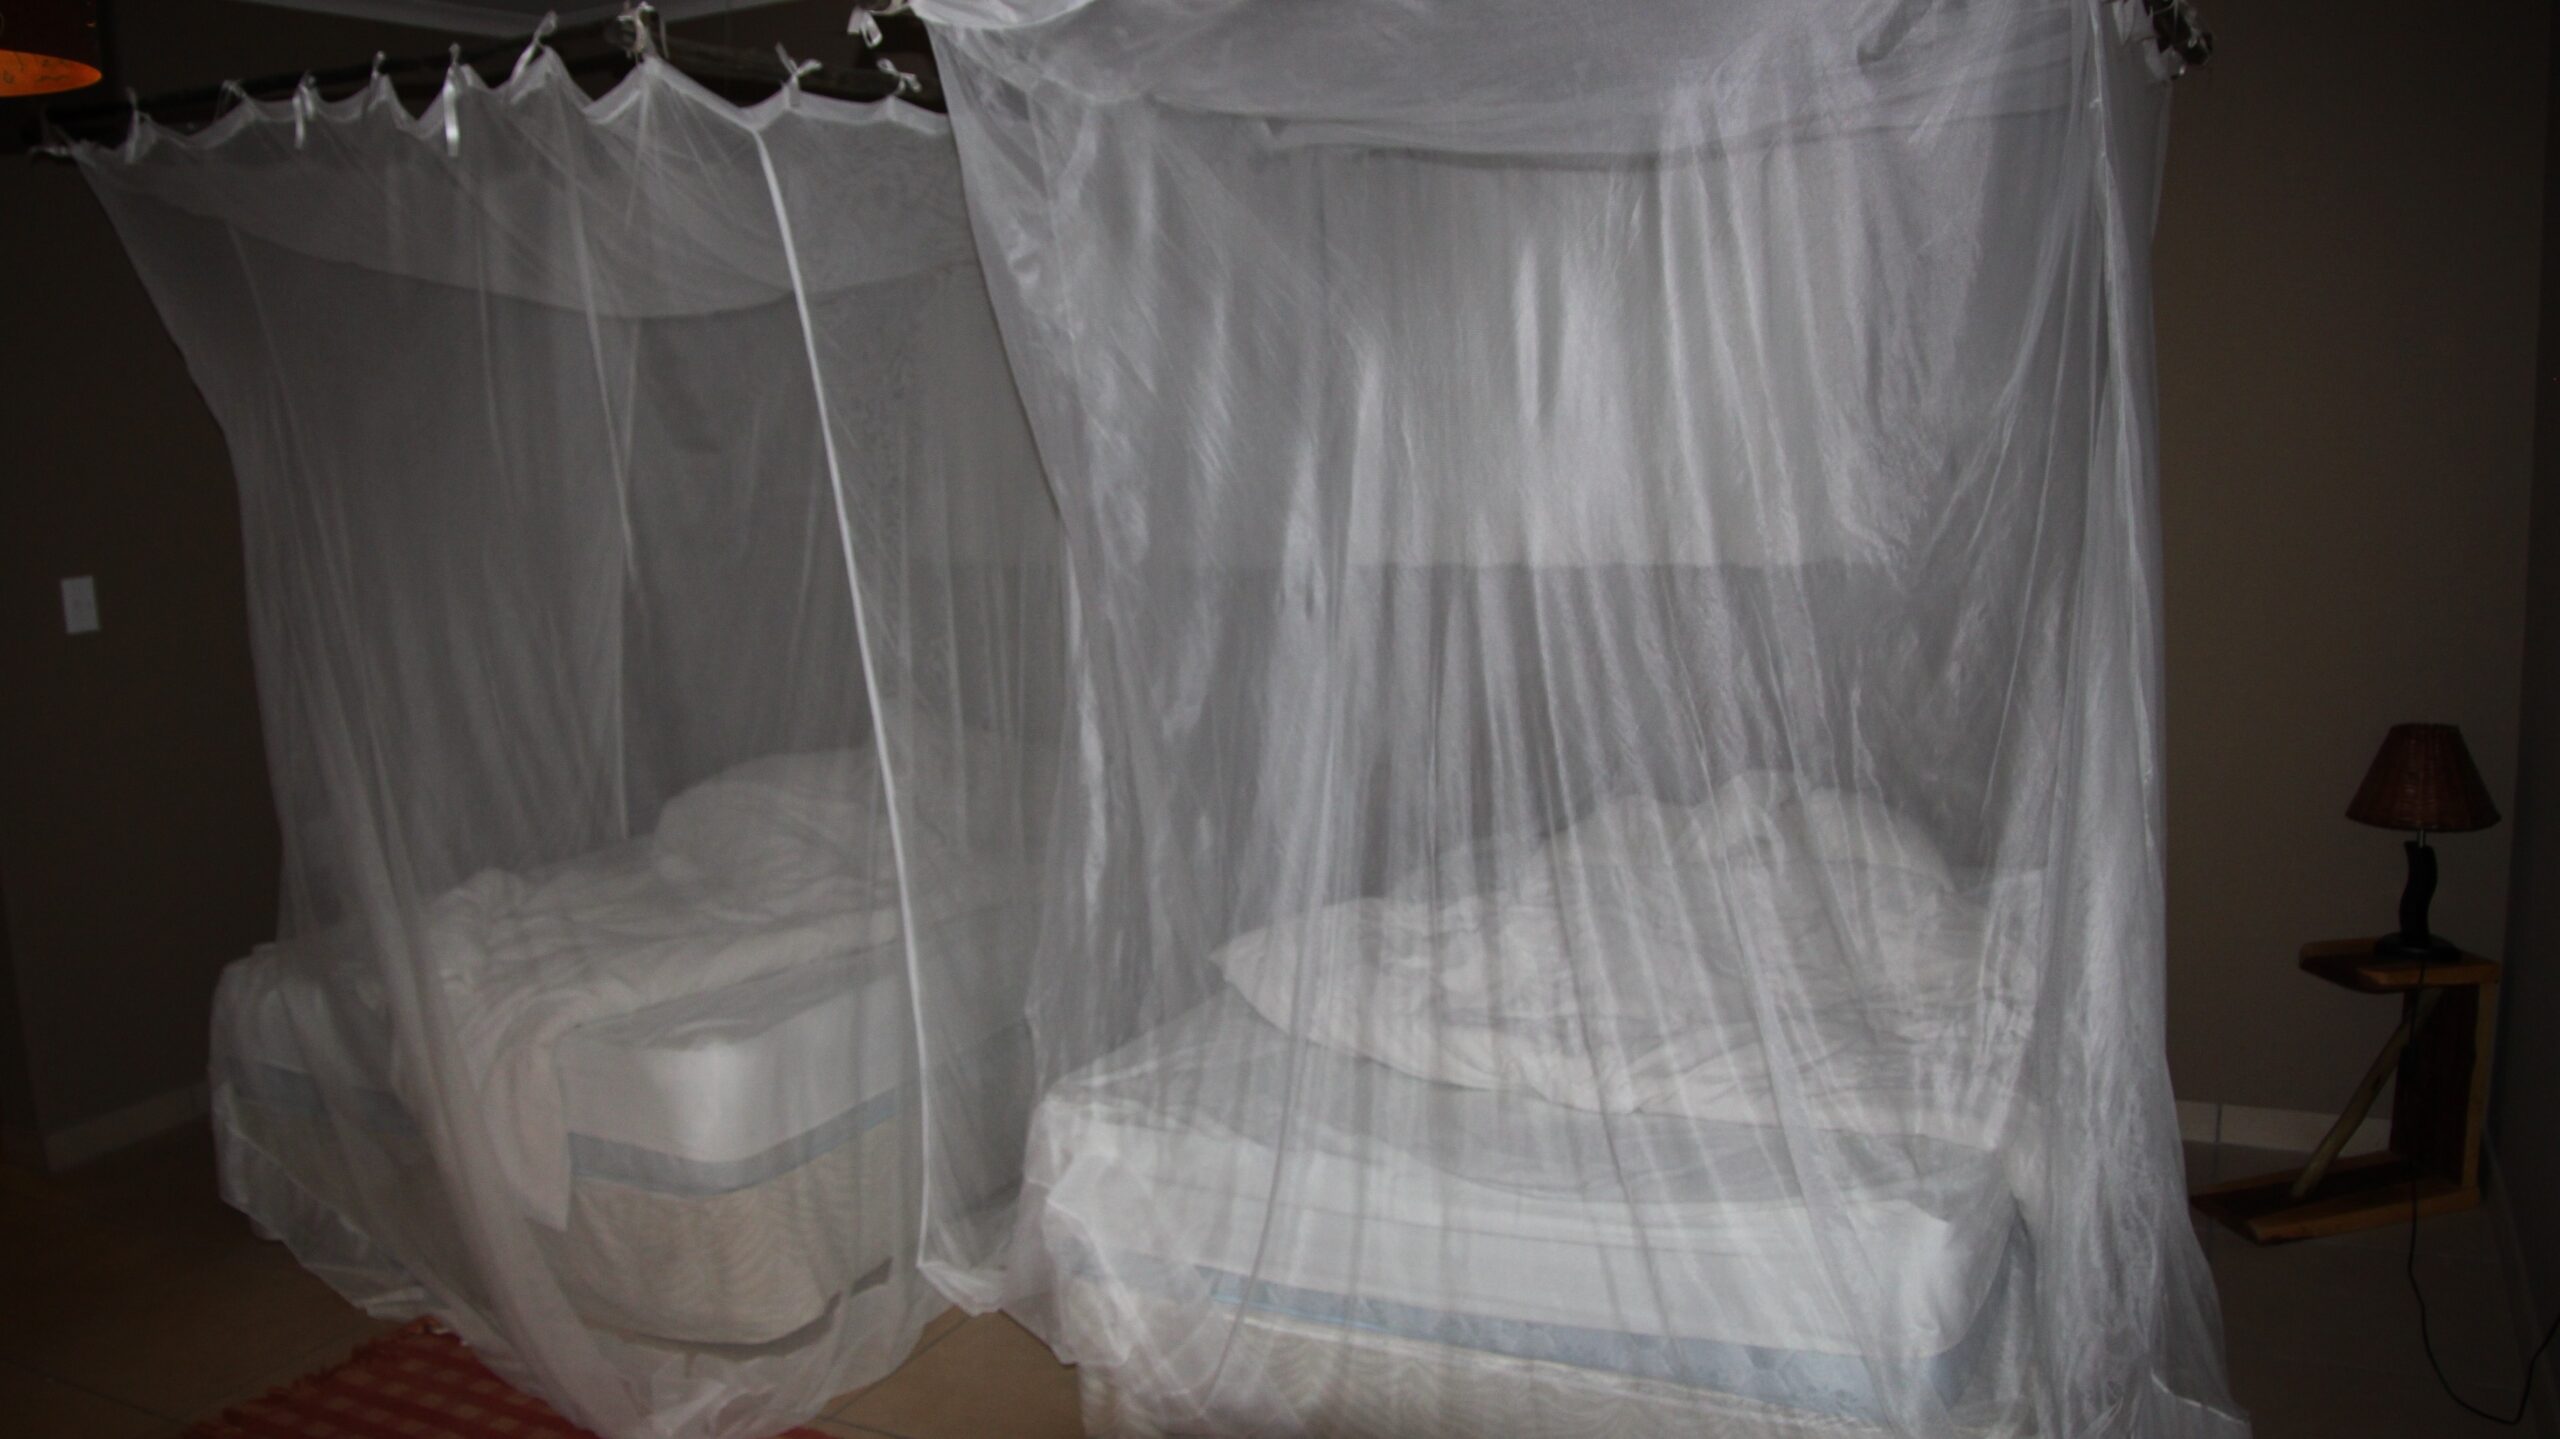 bed with mosquito net 2022 11 16 19 03 36 utc scaled